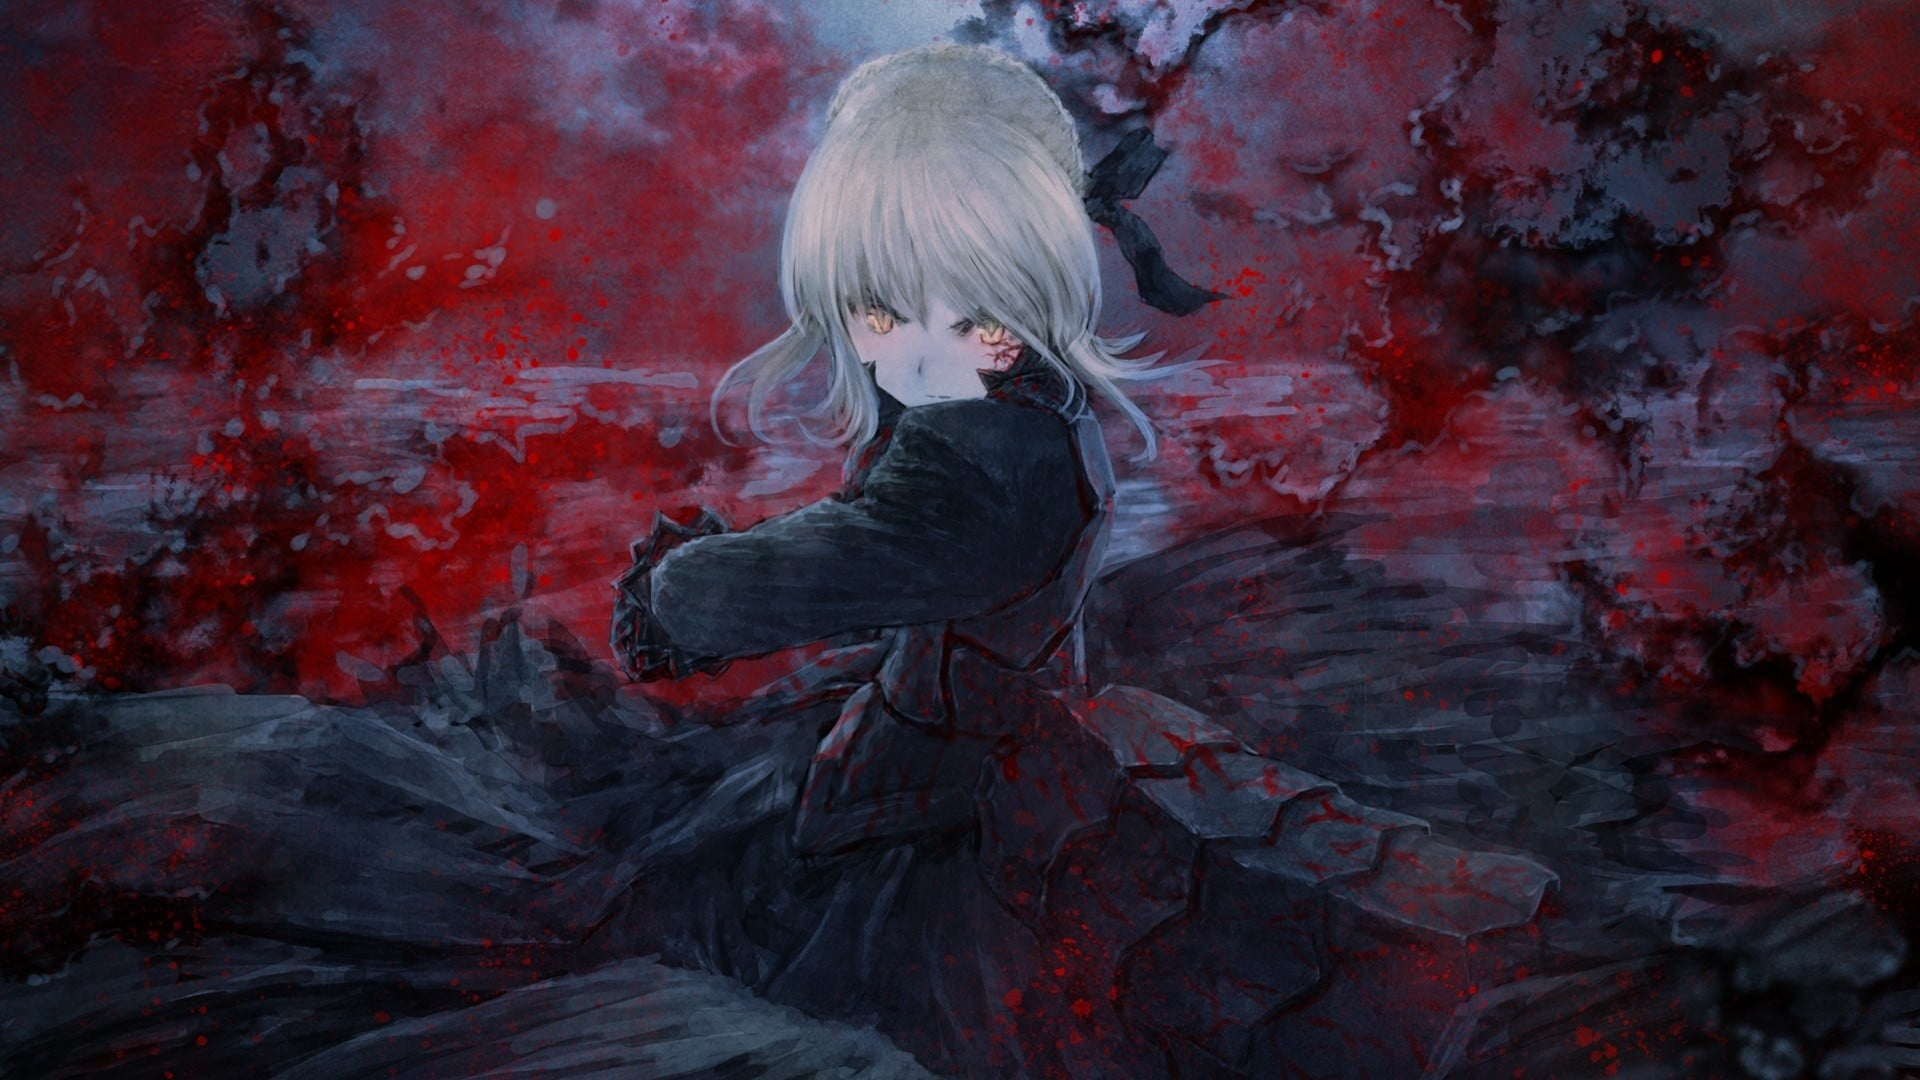 Female anime character wallpaper, Type-Moon, Fate Series, Saber Alter